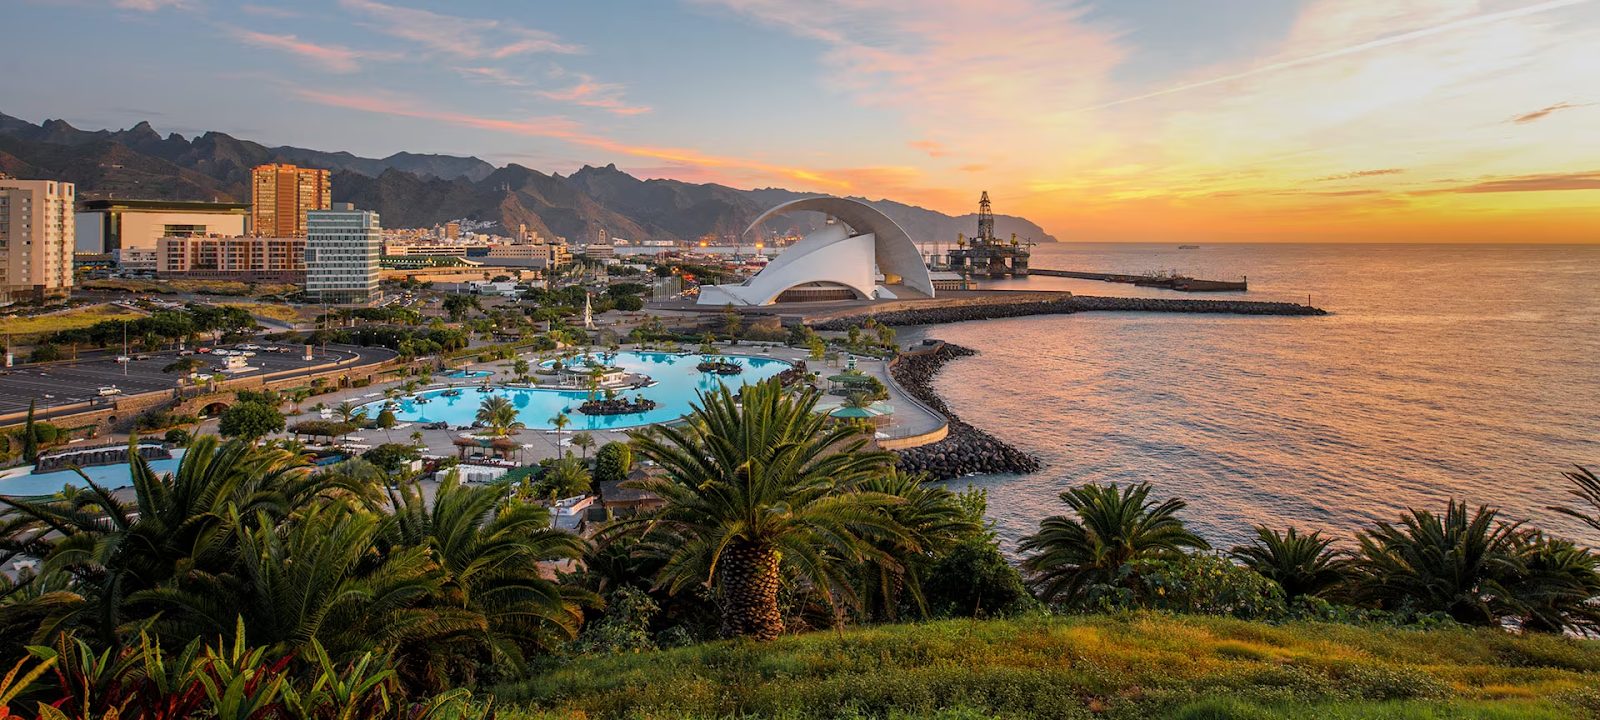 Top 10 February Holiday Destinations: Tenerife, Spain